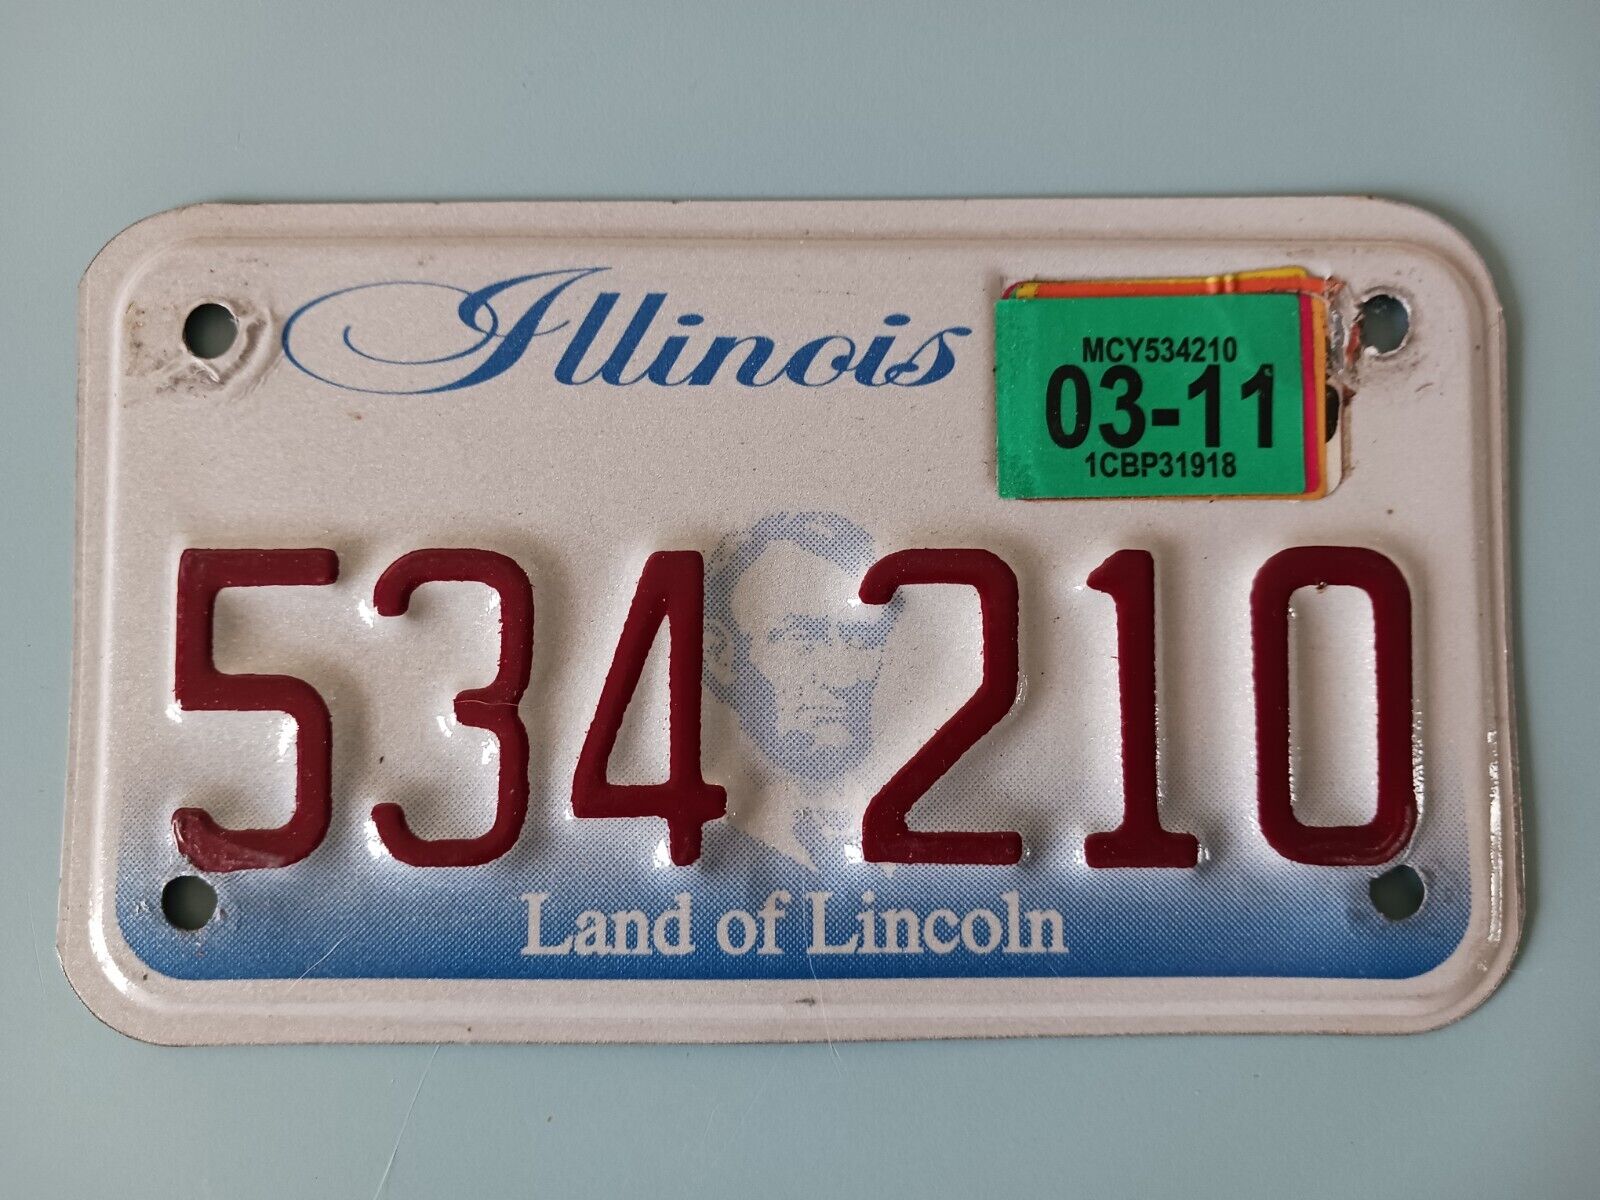 2011 Illinois IL Motorcycle License Plate 534 210